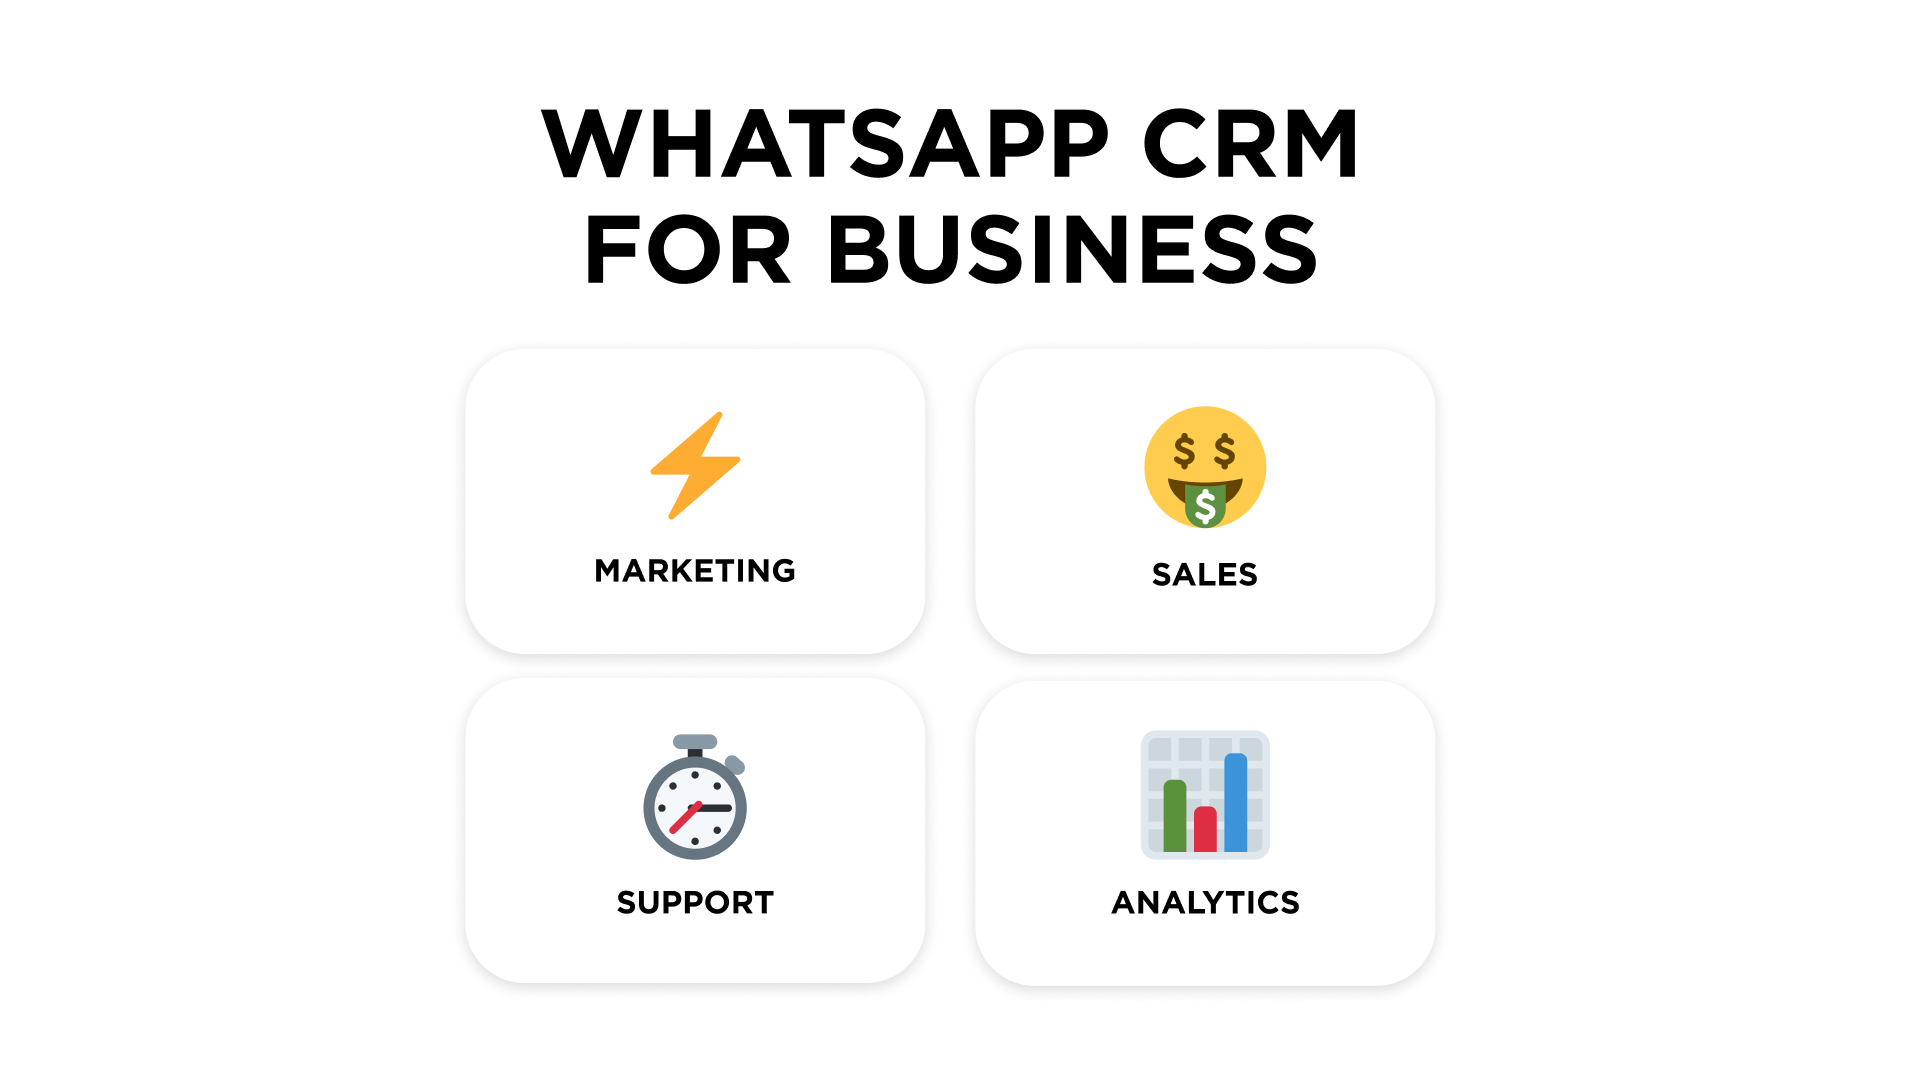 How to use WhatsApp CRM